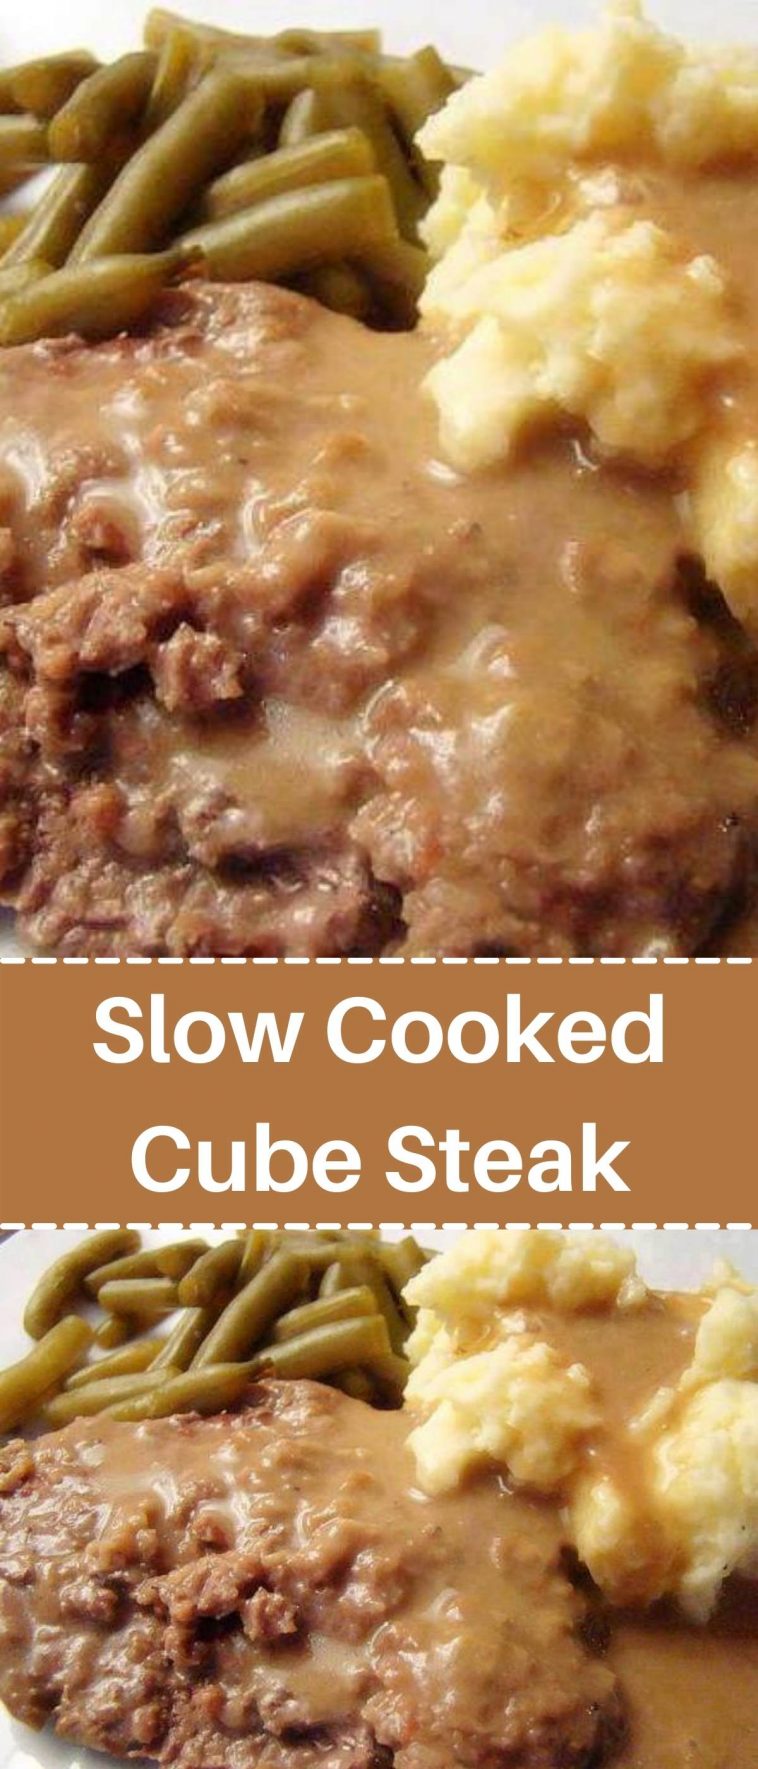 Slow Cooked Cube Steak